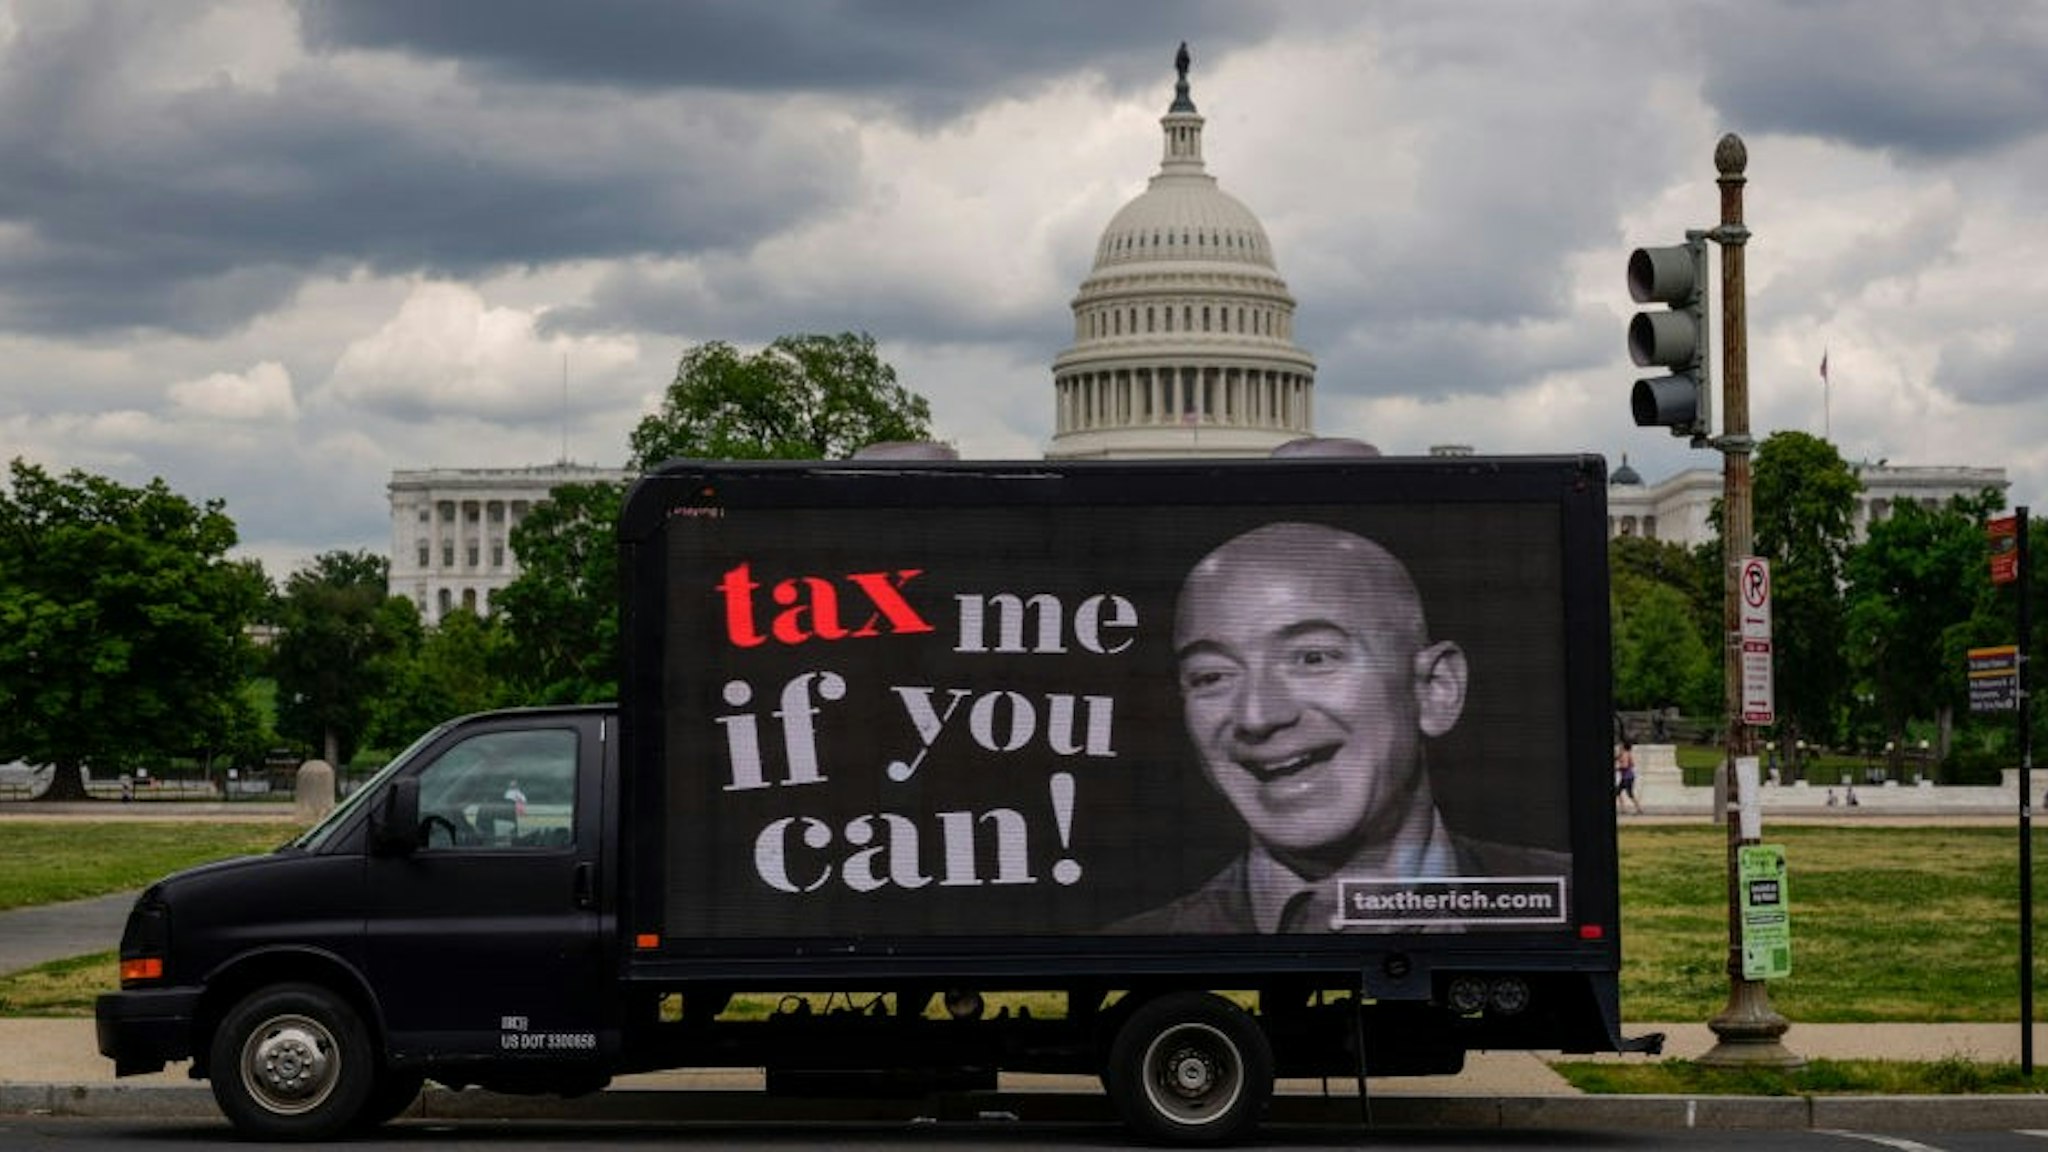 WASHINGTON, DC - MAY 17: A mobile billboard calling for higher taxes on the ultra-wealthy depicts an image of billionaire businessman Jeff Bezos, near the U.S. Capitol on May 17, 2021 in Washington, DC. Organized by the group "Patriotic Millionaires," the mobile billboards are rolling through Washington, DC and New York City on Monday to mark Tax Day, calling for higher taxes for wealthy Americans. (Photo by